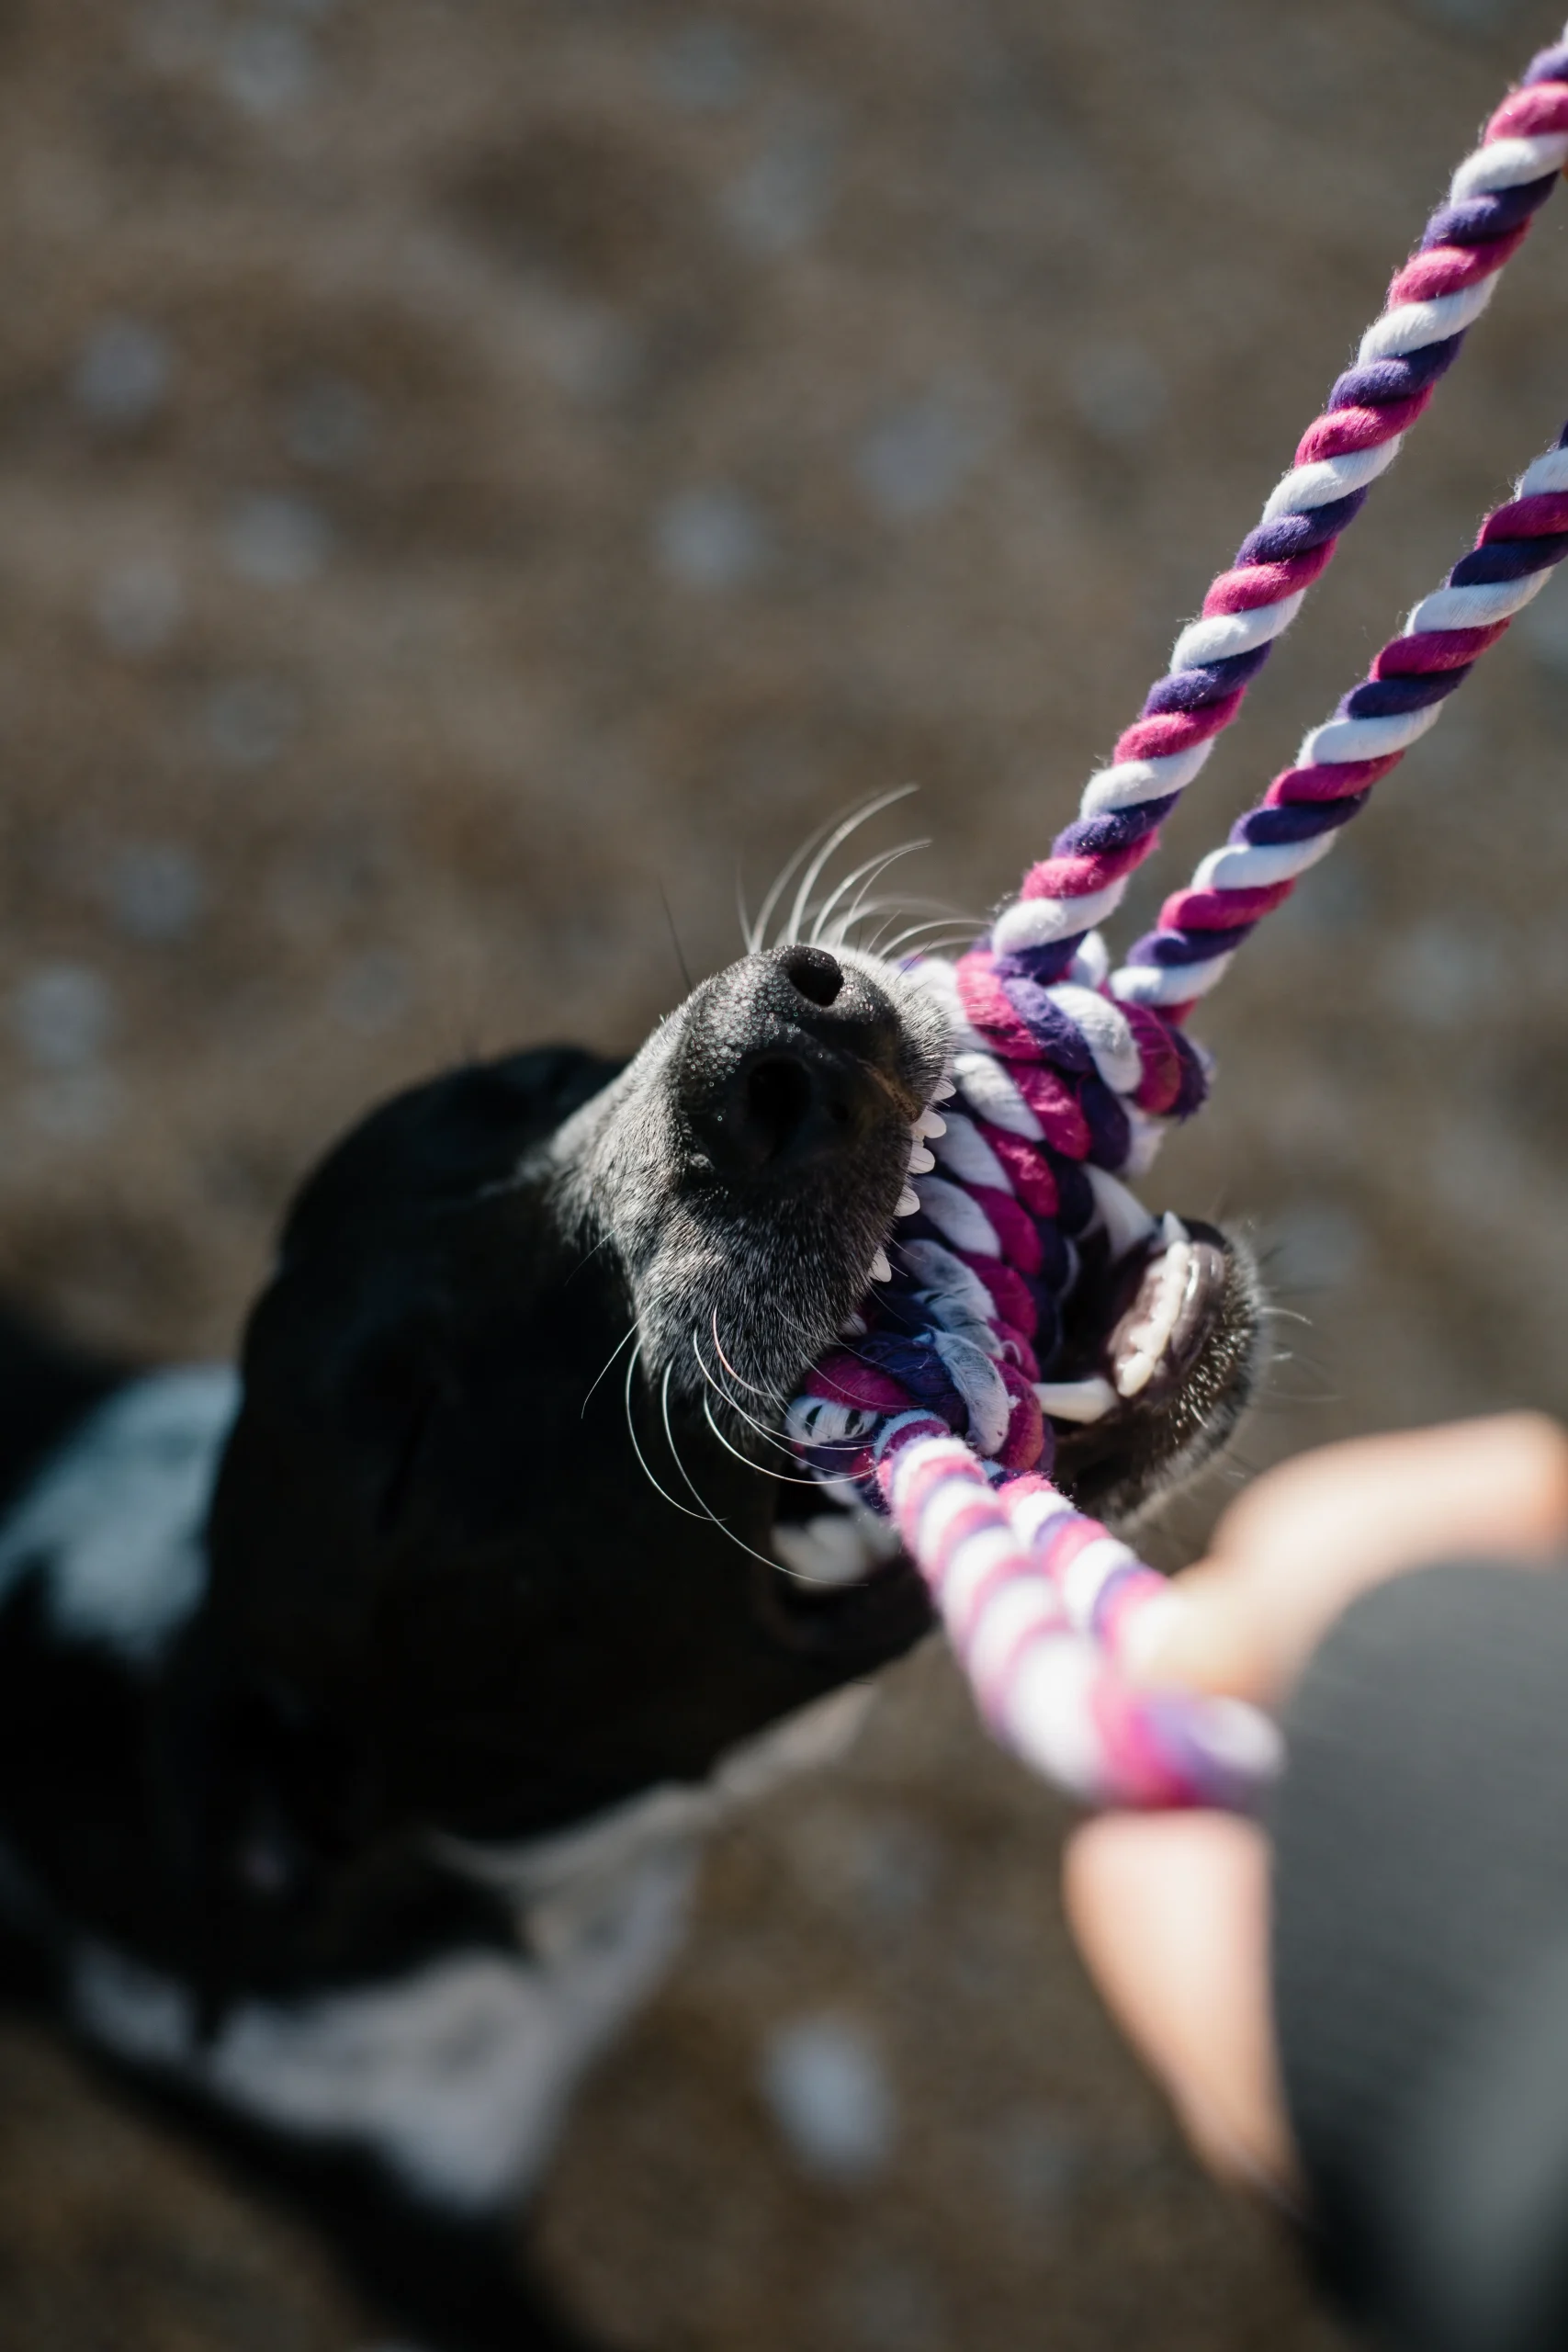 Cute dog playing with a rope. Even a cute dog can become vicious in the right circumstance. If you have been bitten by a dog in Texas you may have a personal injury claim. Contact a personal injury lawyer.